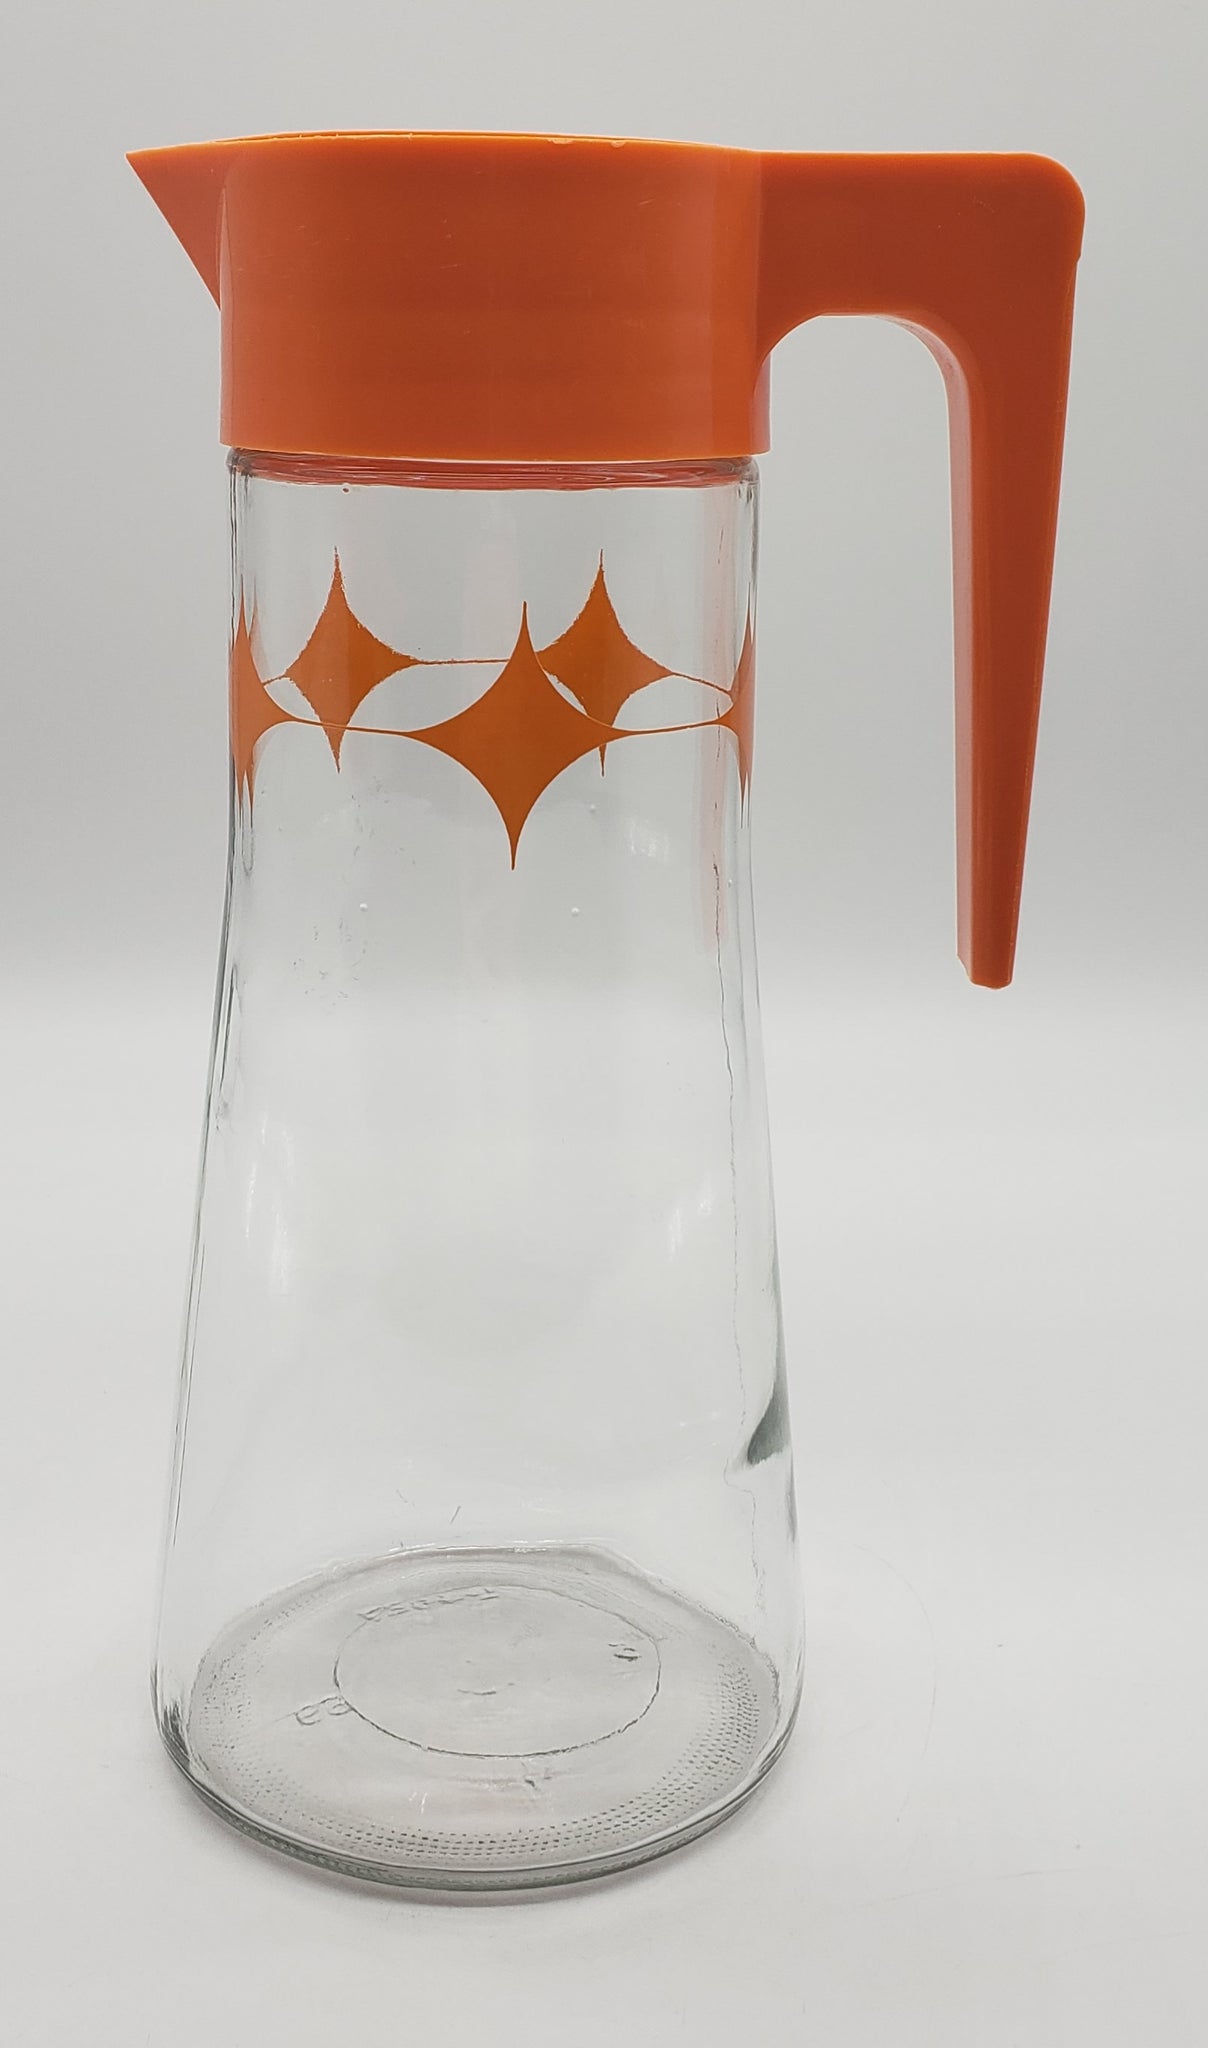 Anchor Hocking Carafe with Lid